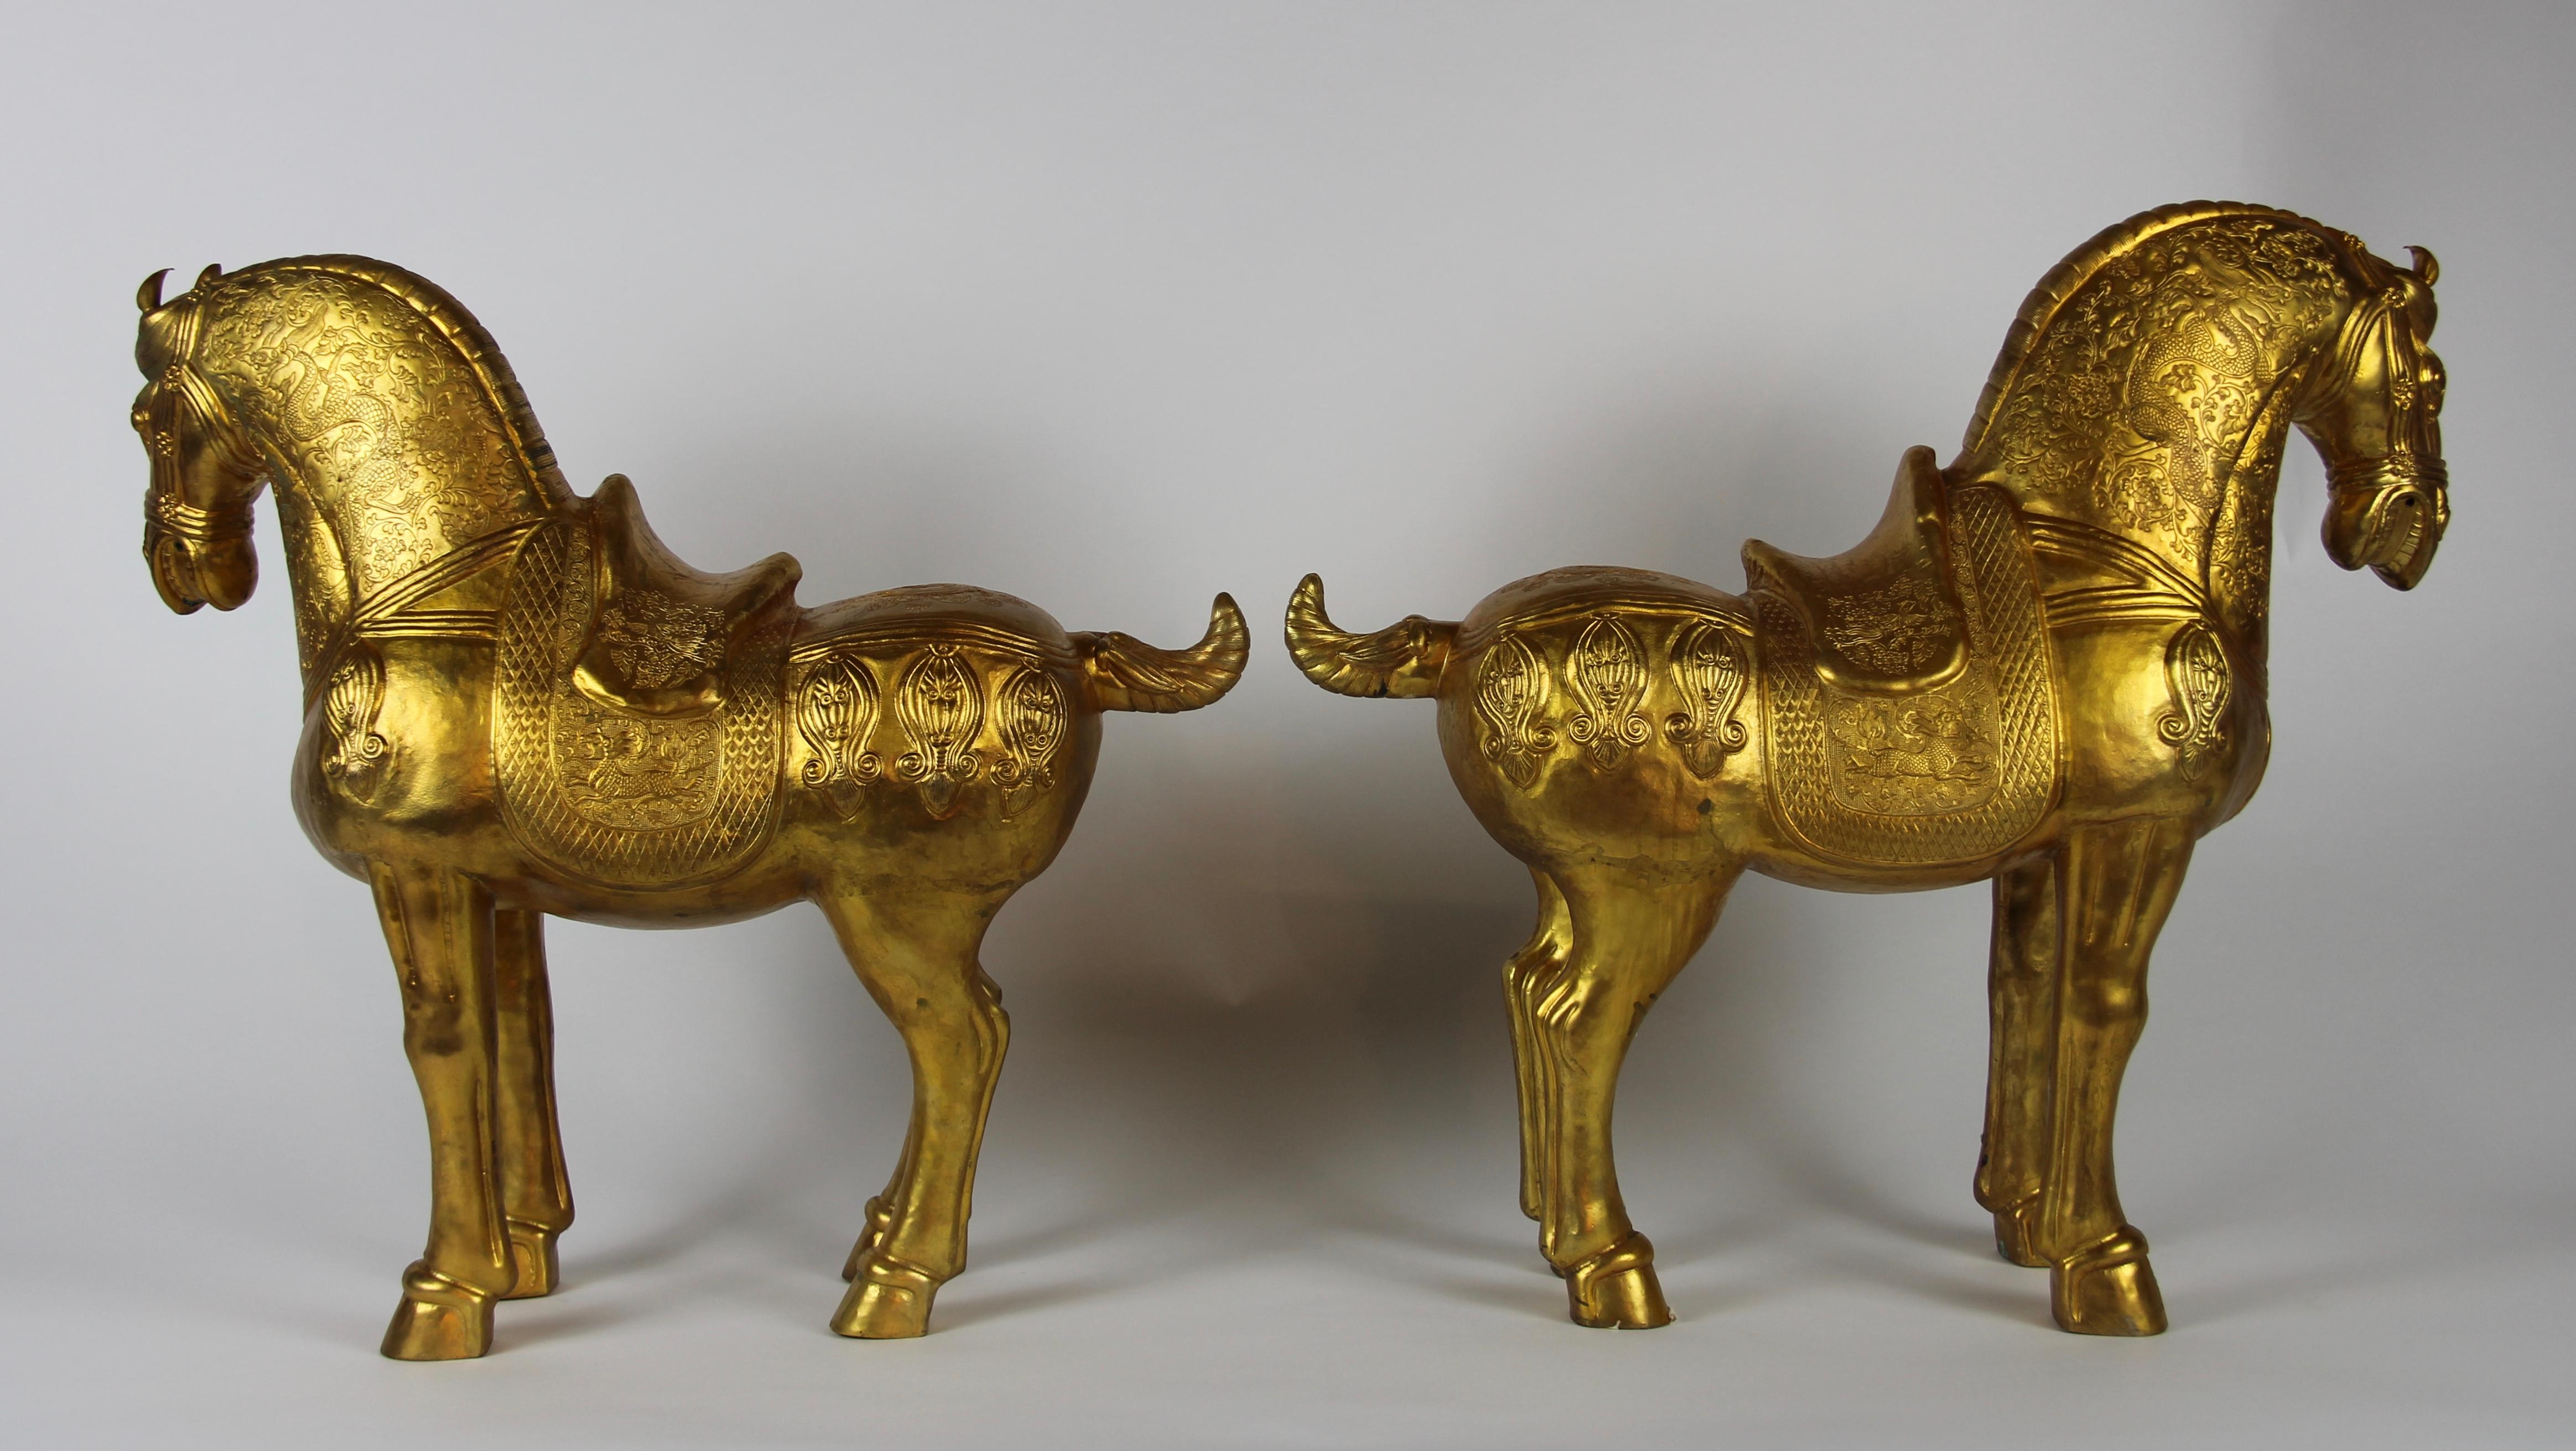 Late 19th Century Pair of Chinese Orientalist Design Gilt Bronze Royal Horses Elaborately Detailed